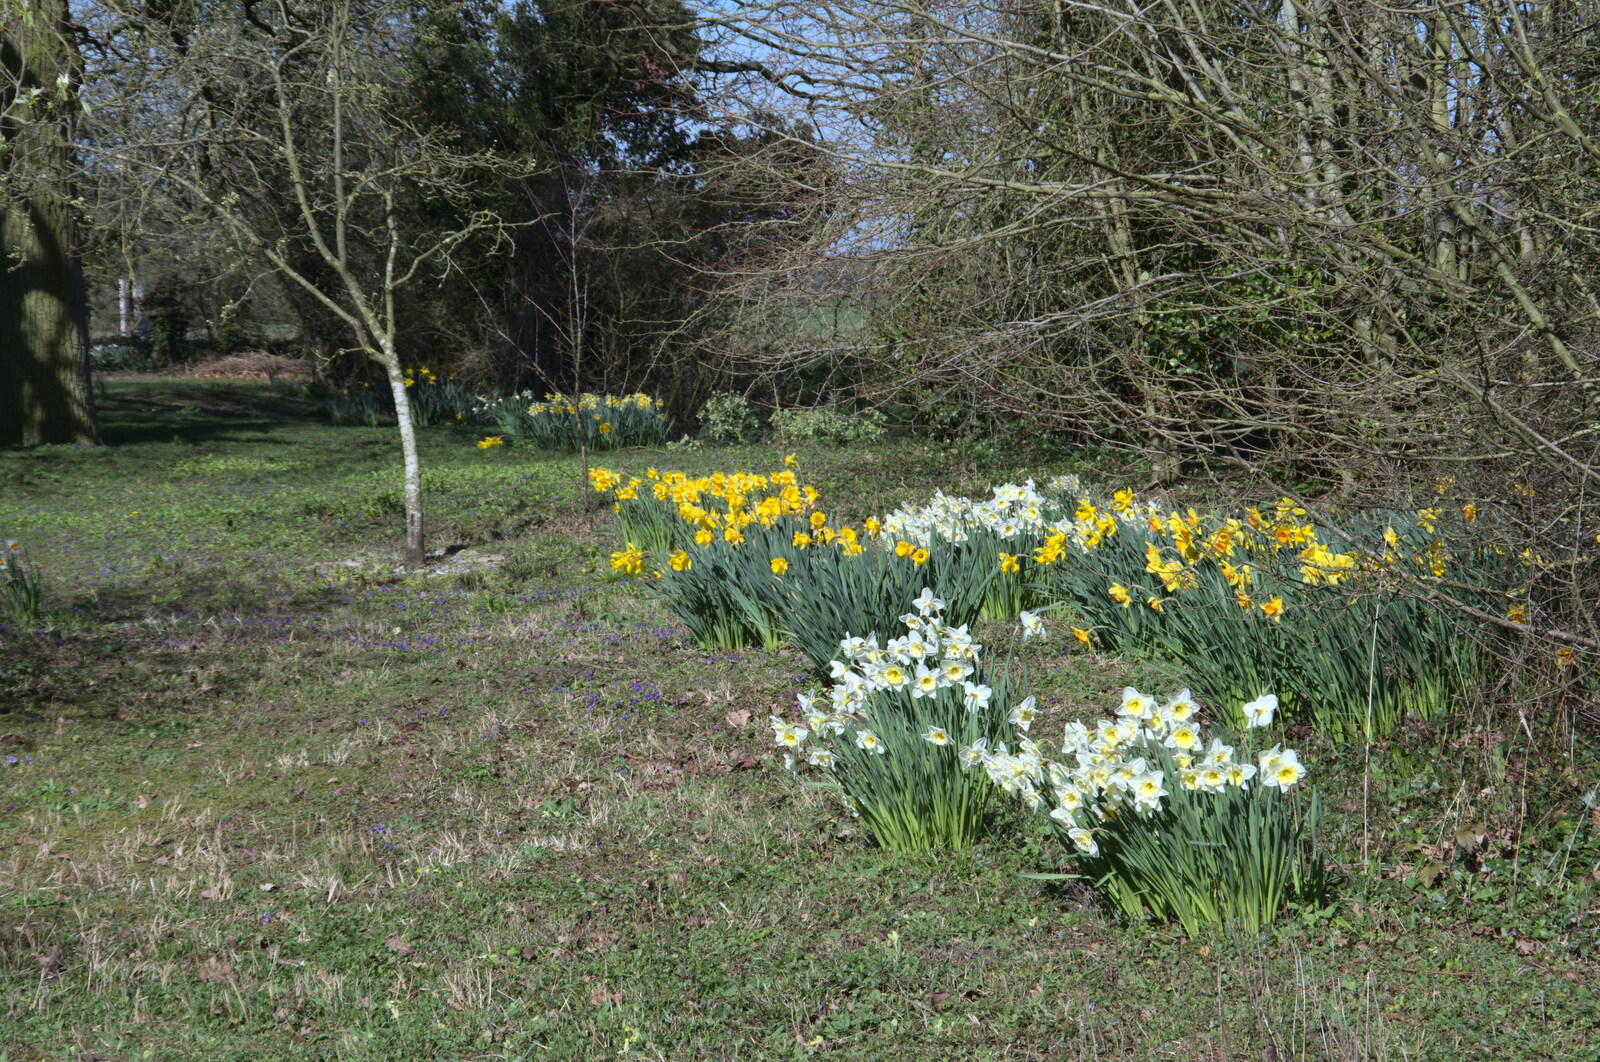 Some late daffodils from Life Before Lockdown: A March Miscellany - 22nd March 2020